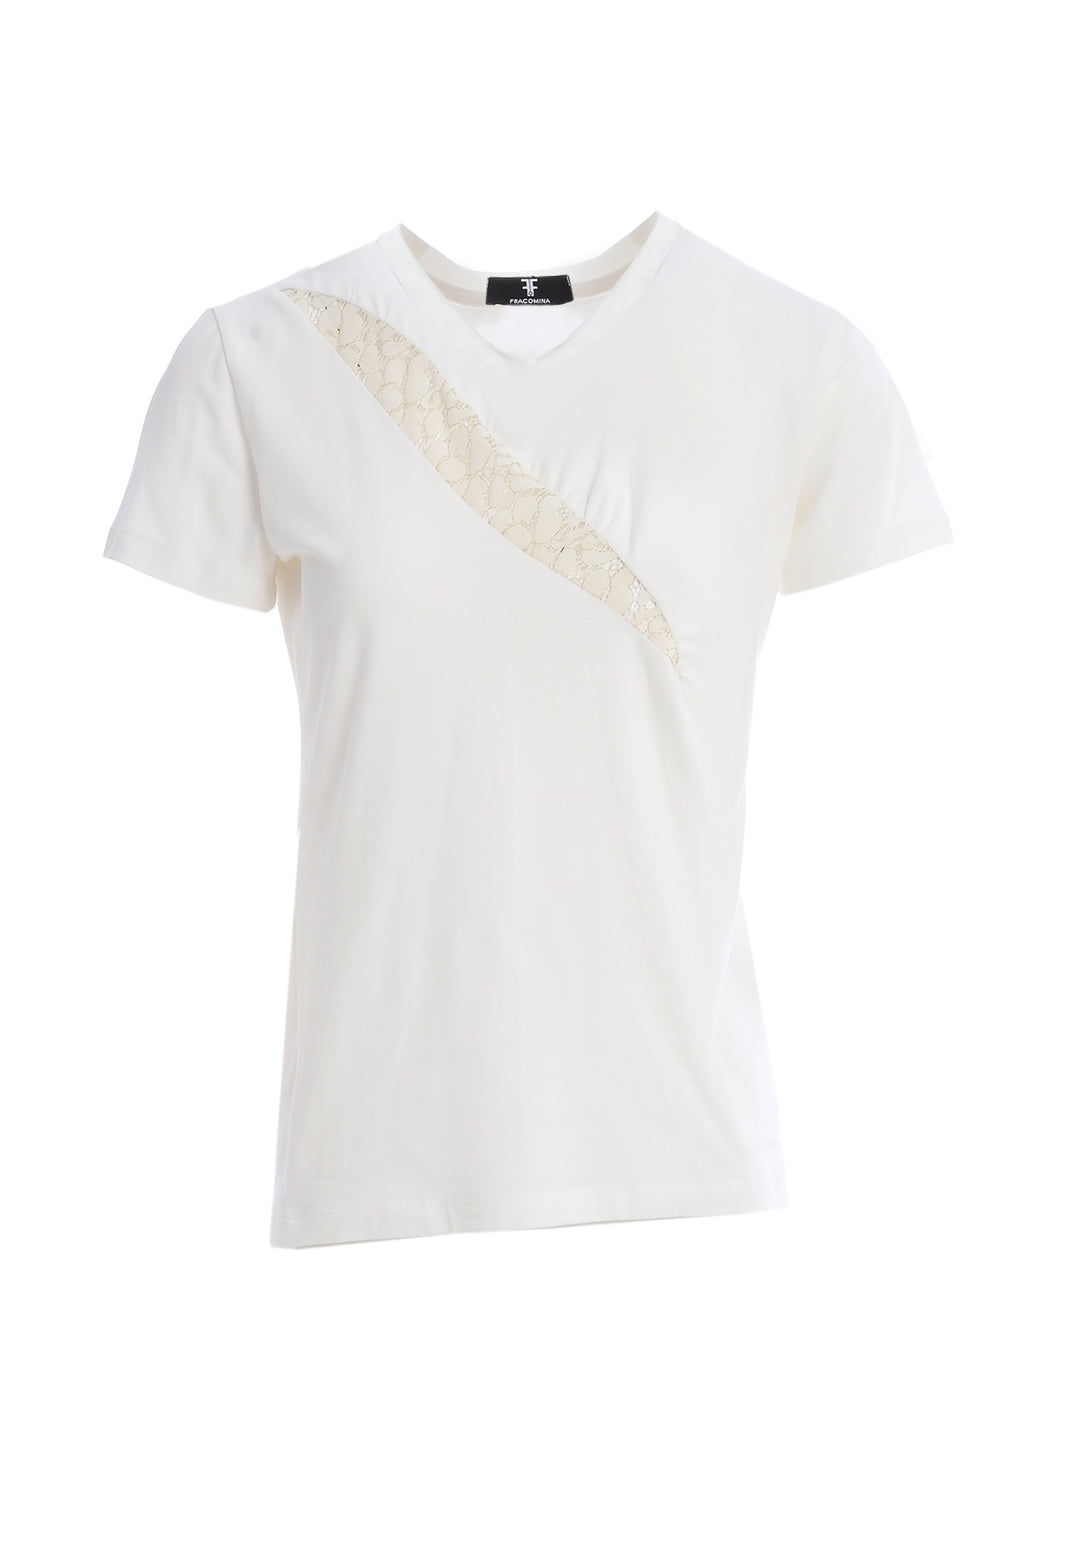 T-shirt slim fit made in jersey and lace details